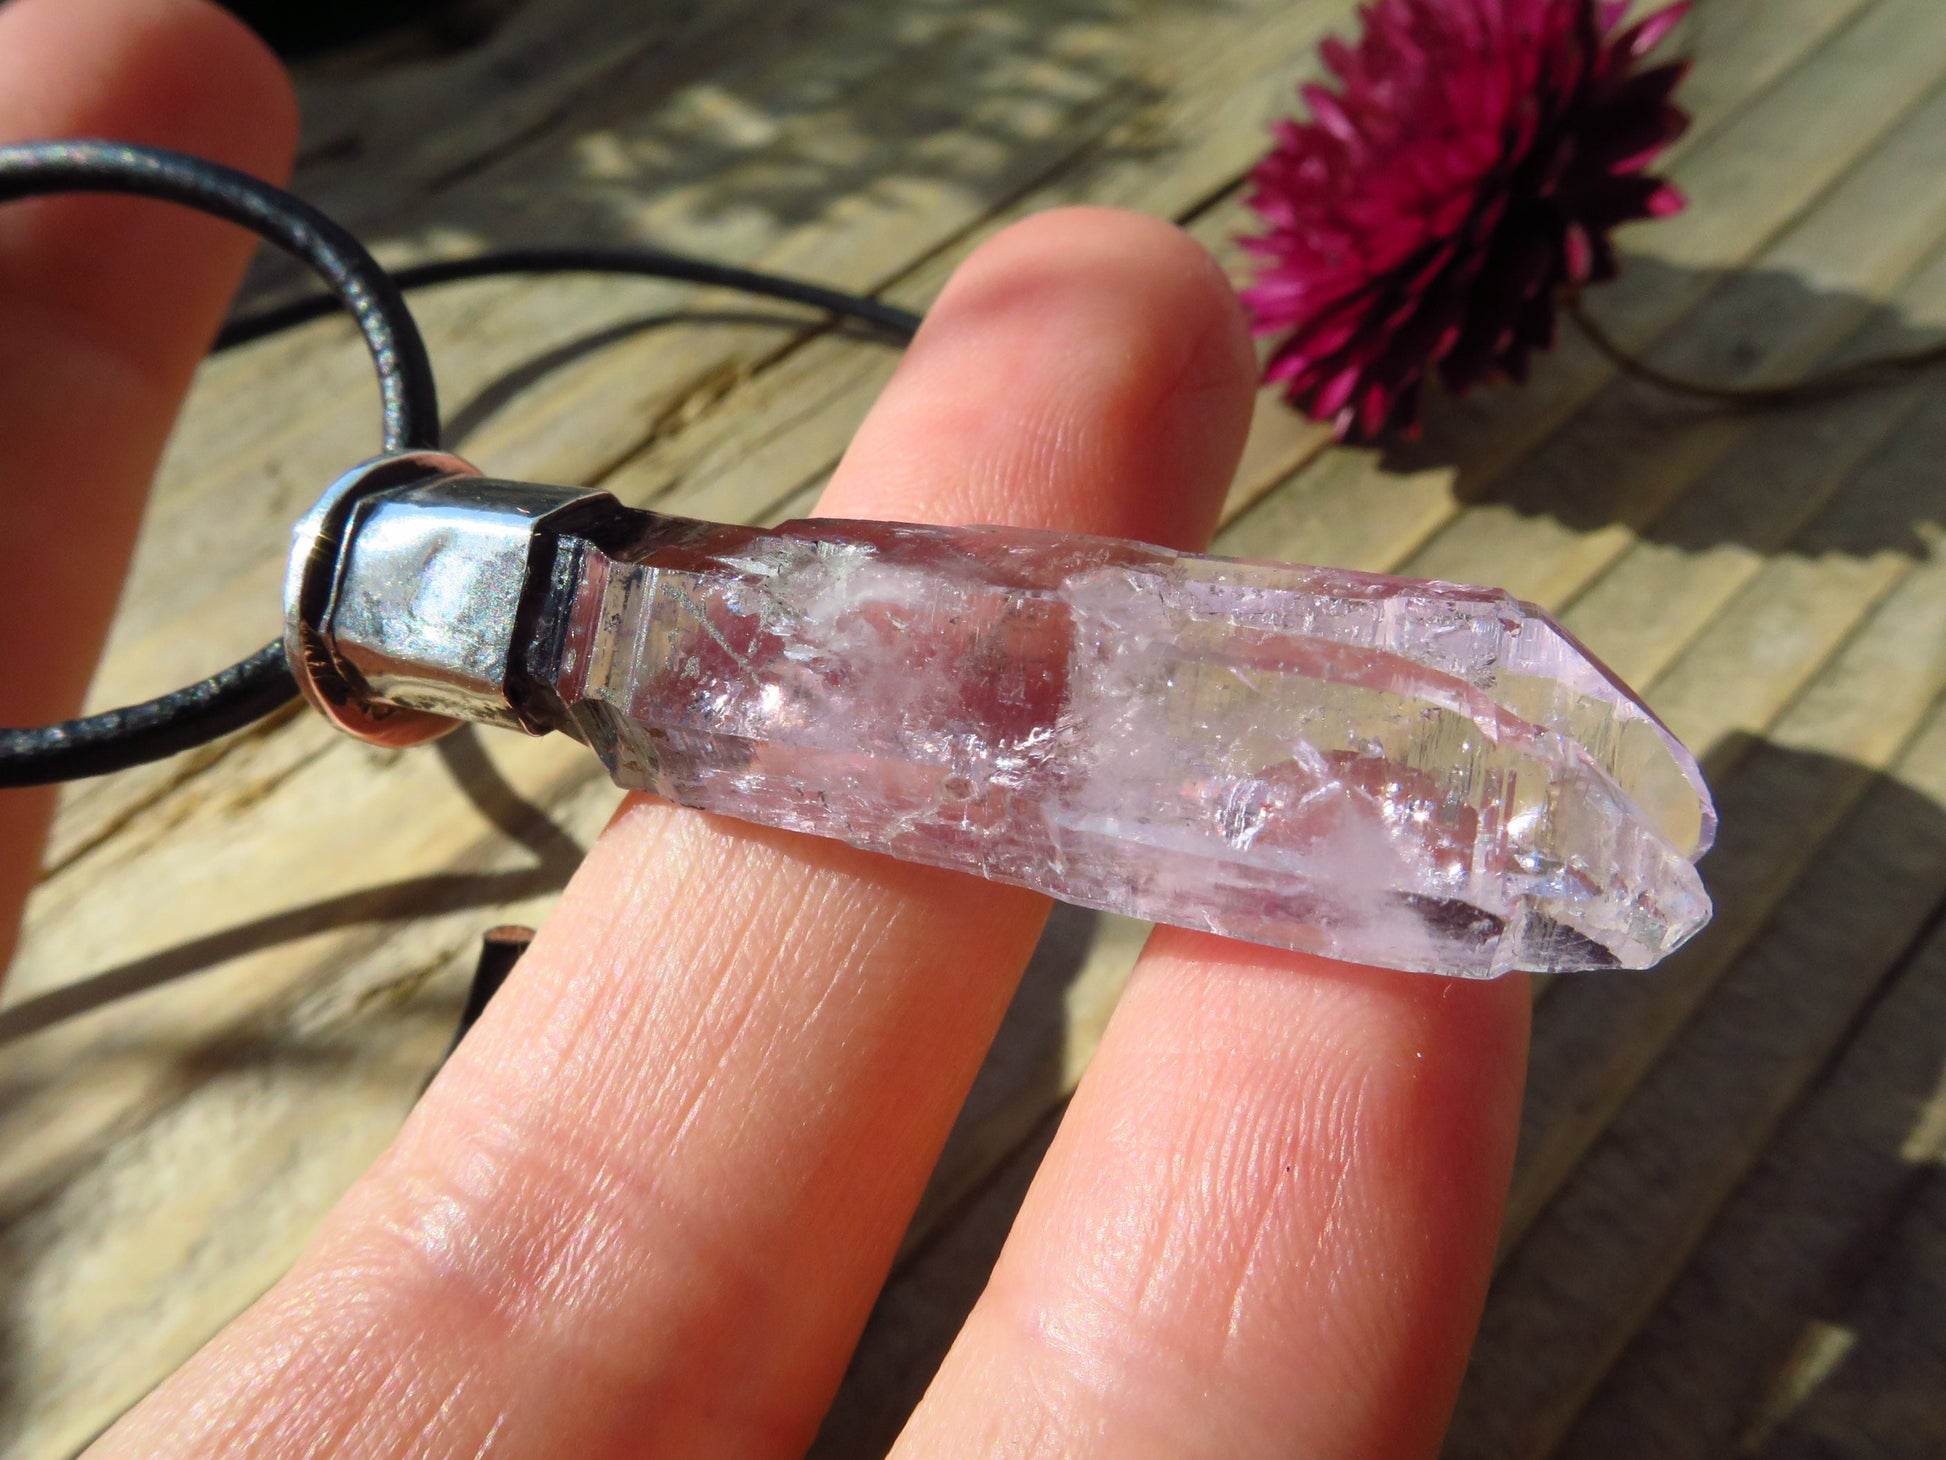 Veracruz Amethyst Natural double point Crystal Pendant Clear Natural Gemstone Set in 925 Sterling Silver Vera Cruz Mexico Leather